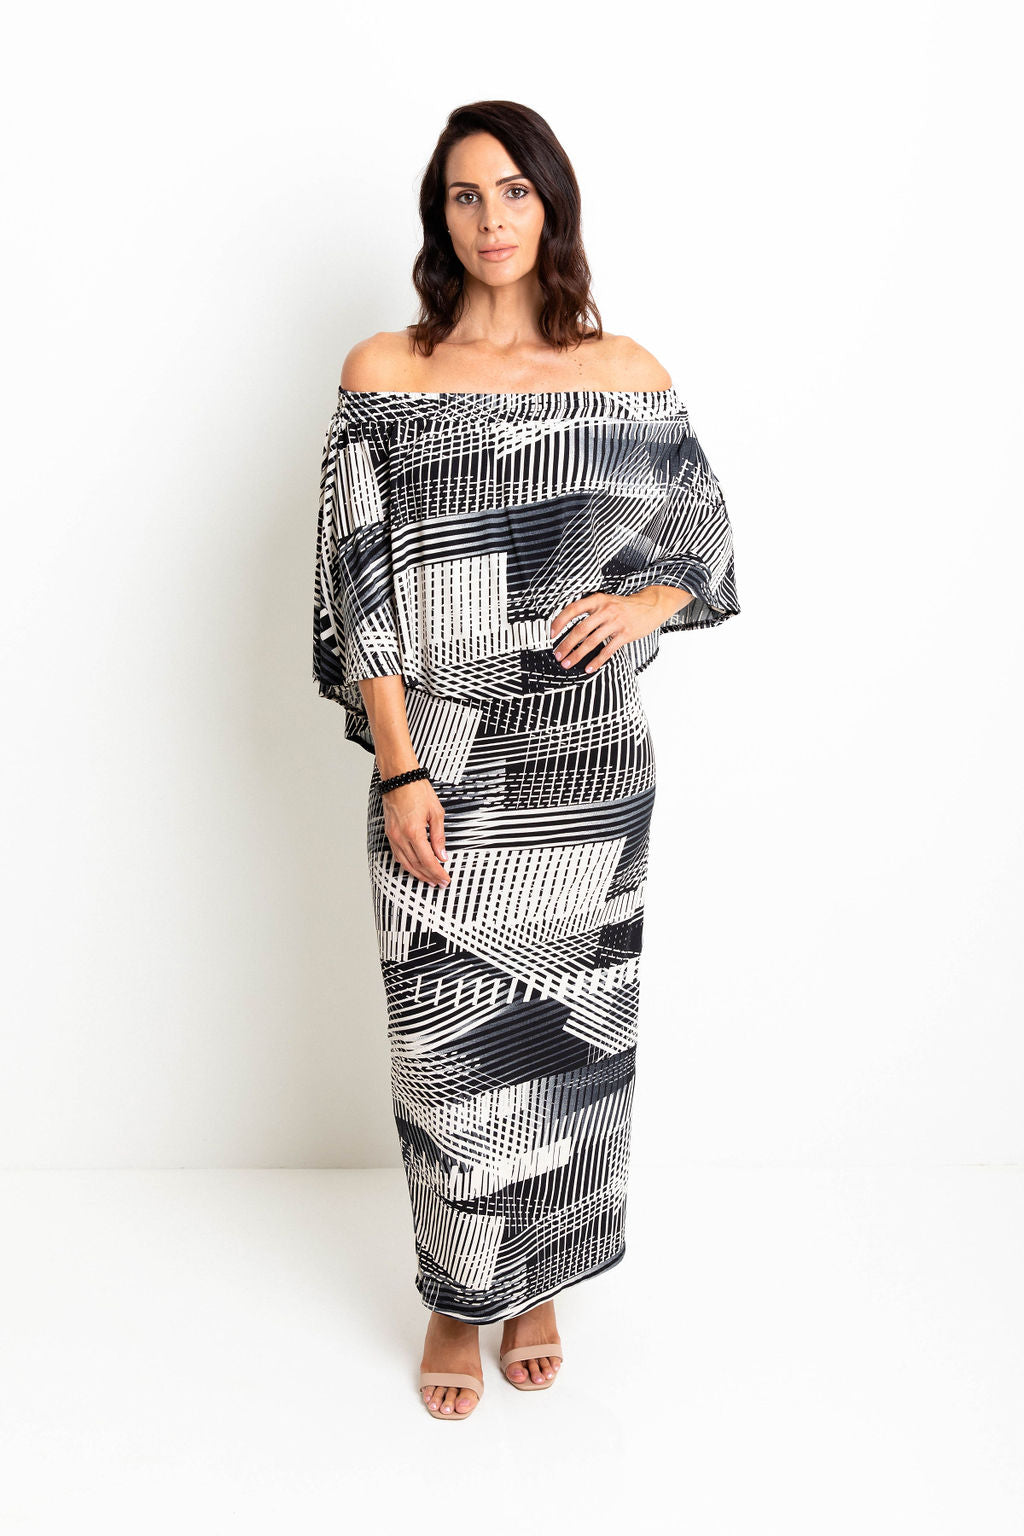 OVER 70% OFF  No Shade Here Dress Long - Graphic